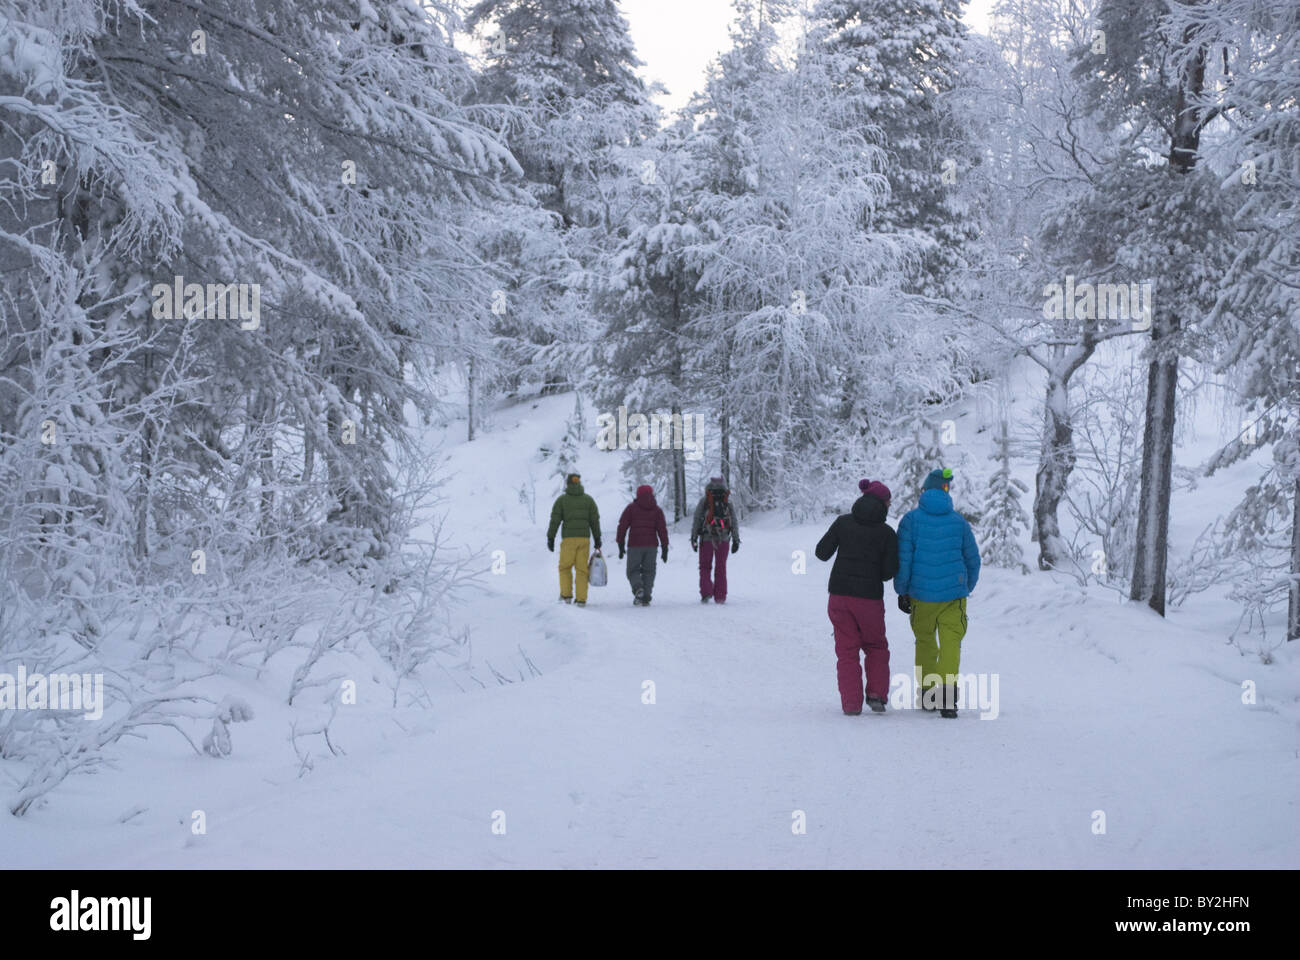 A group of colorfully dressed young adults walking among snow-clad trees at Pyhätunturi, Finnish Lapland. Stock Photo